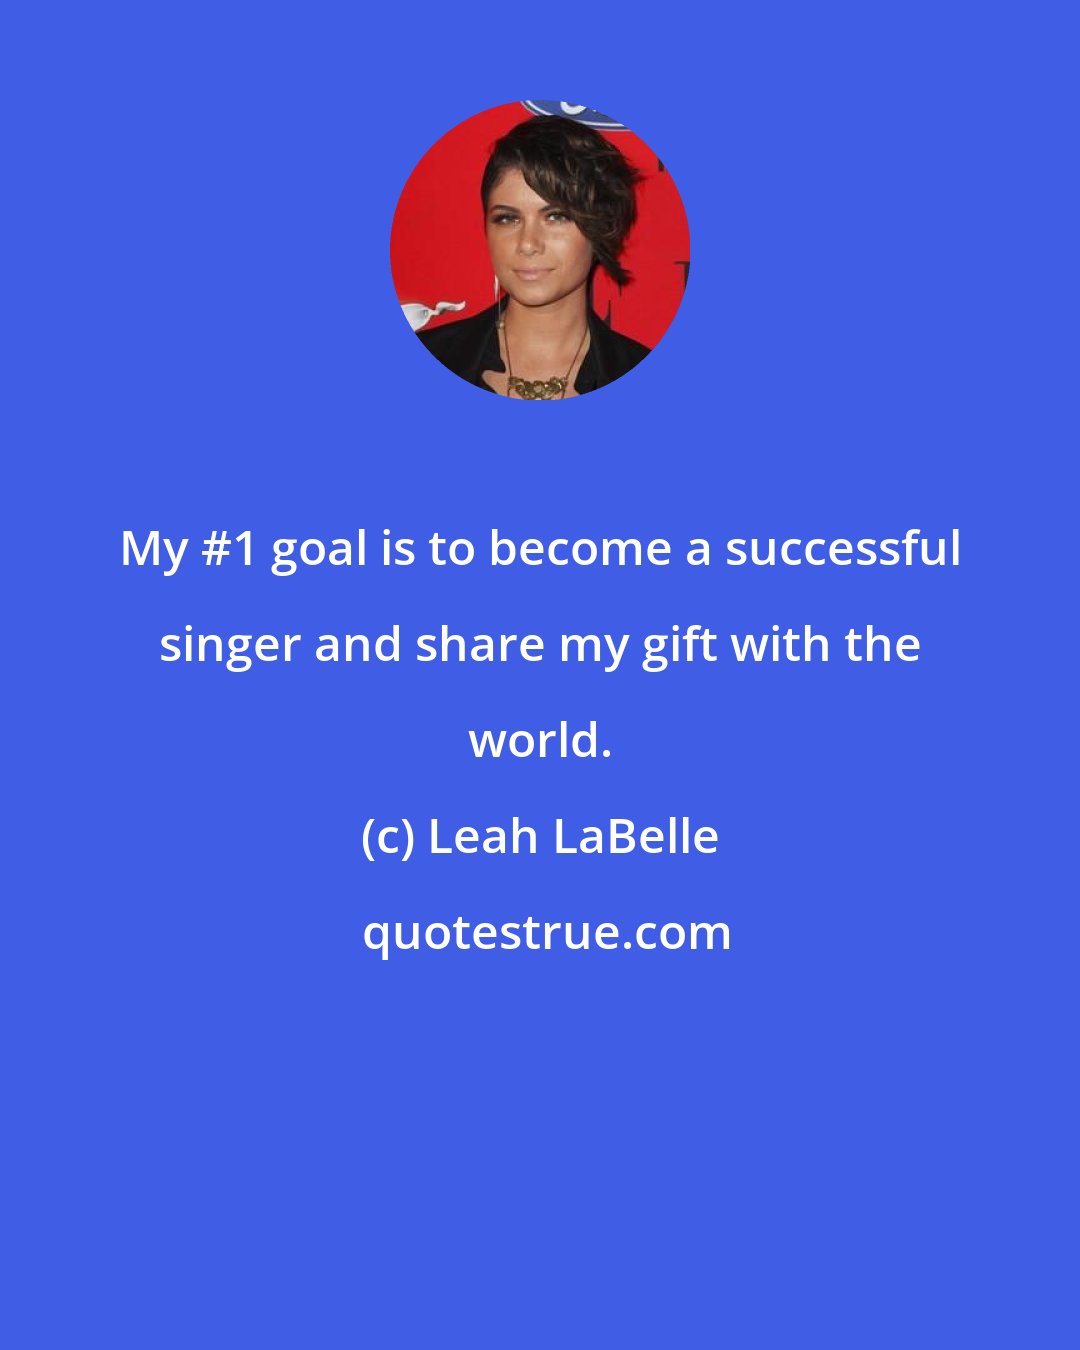 Leah LaBelle: My #1 goal is to become a successful singer and share my gift with the world.